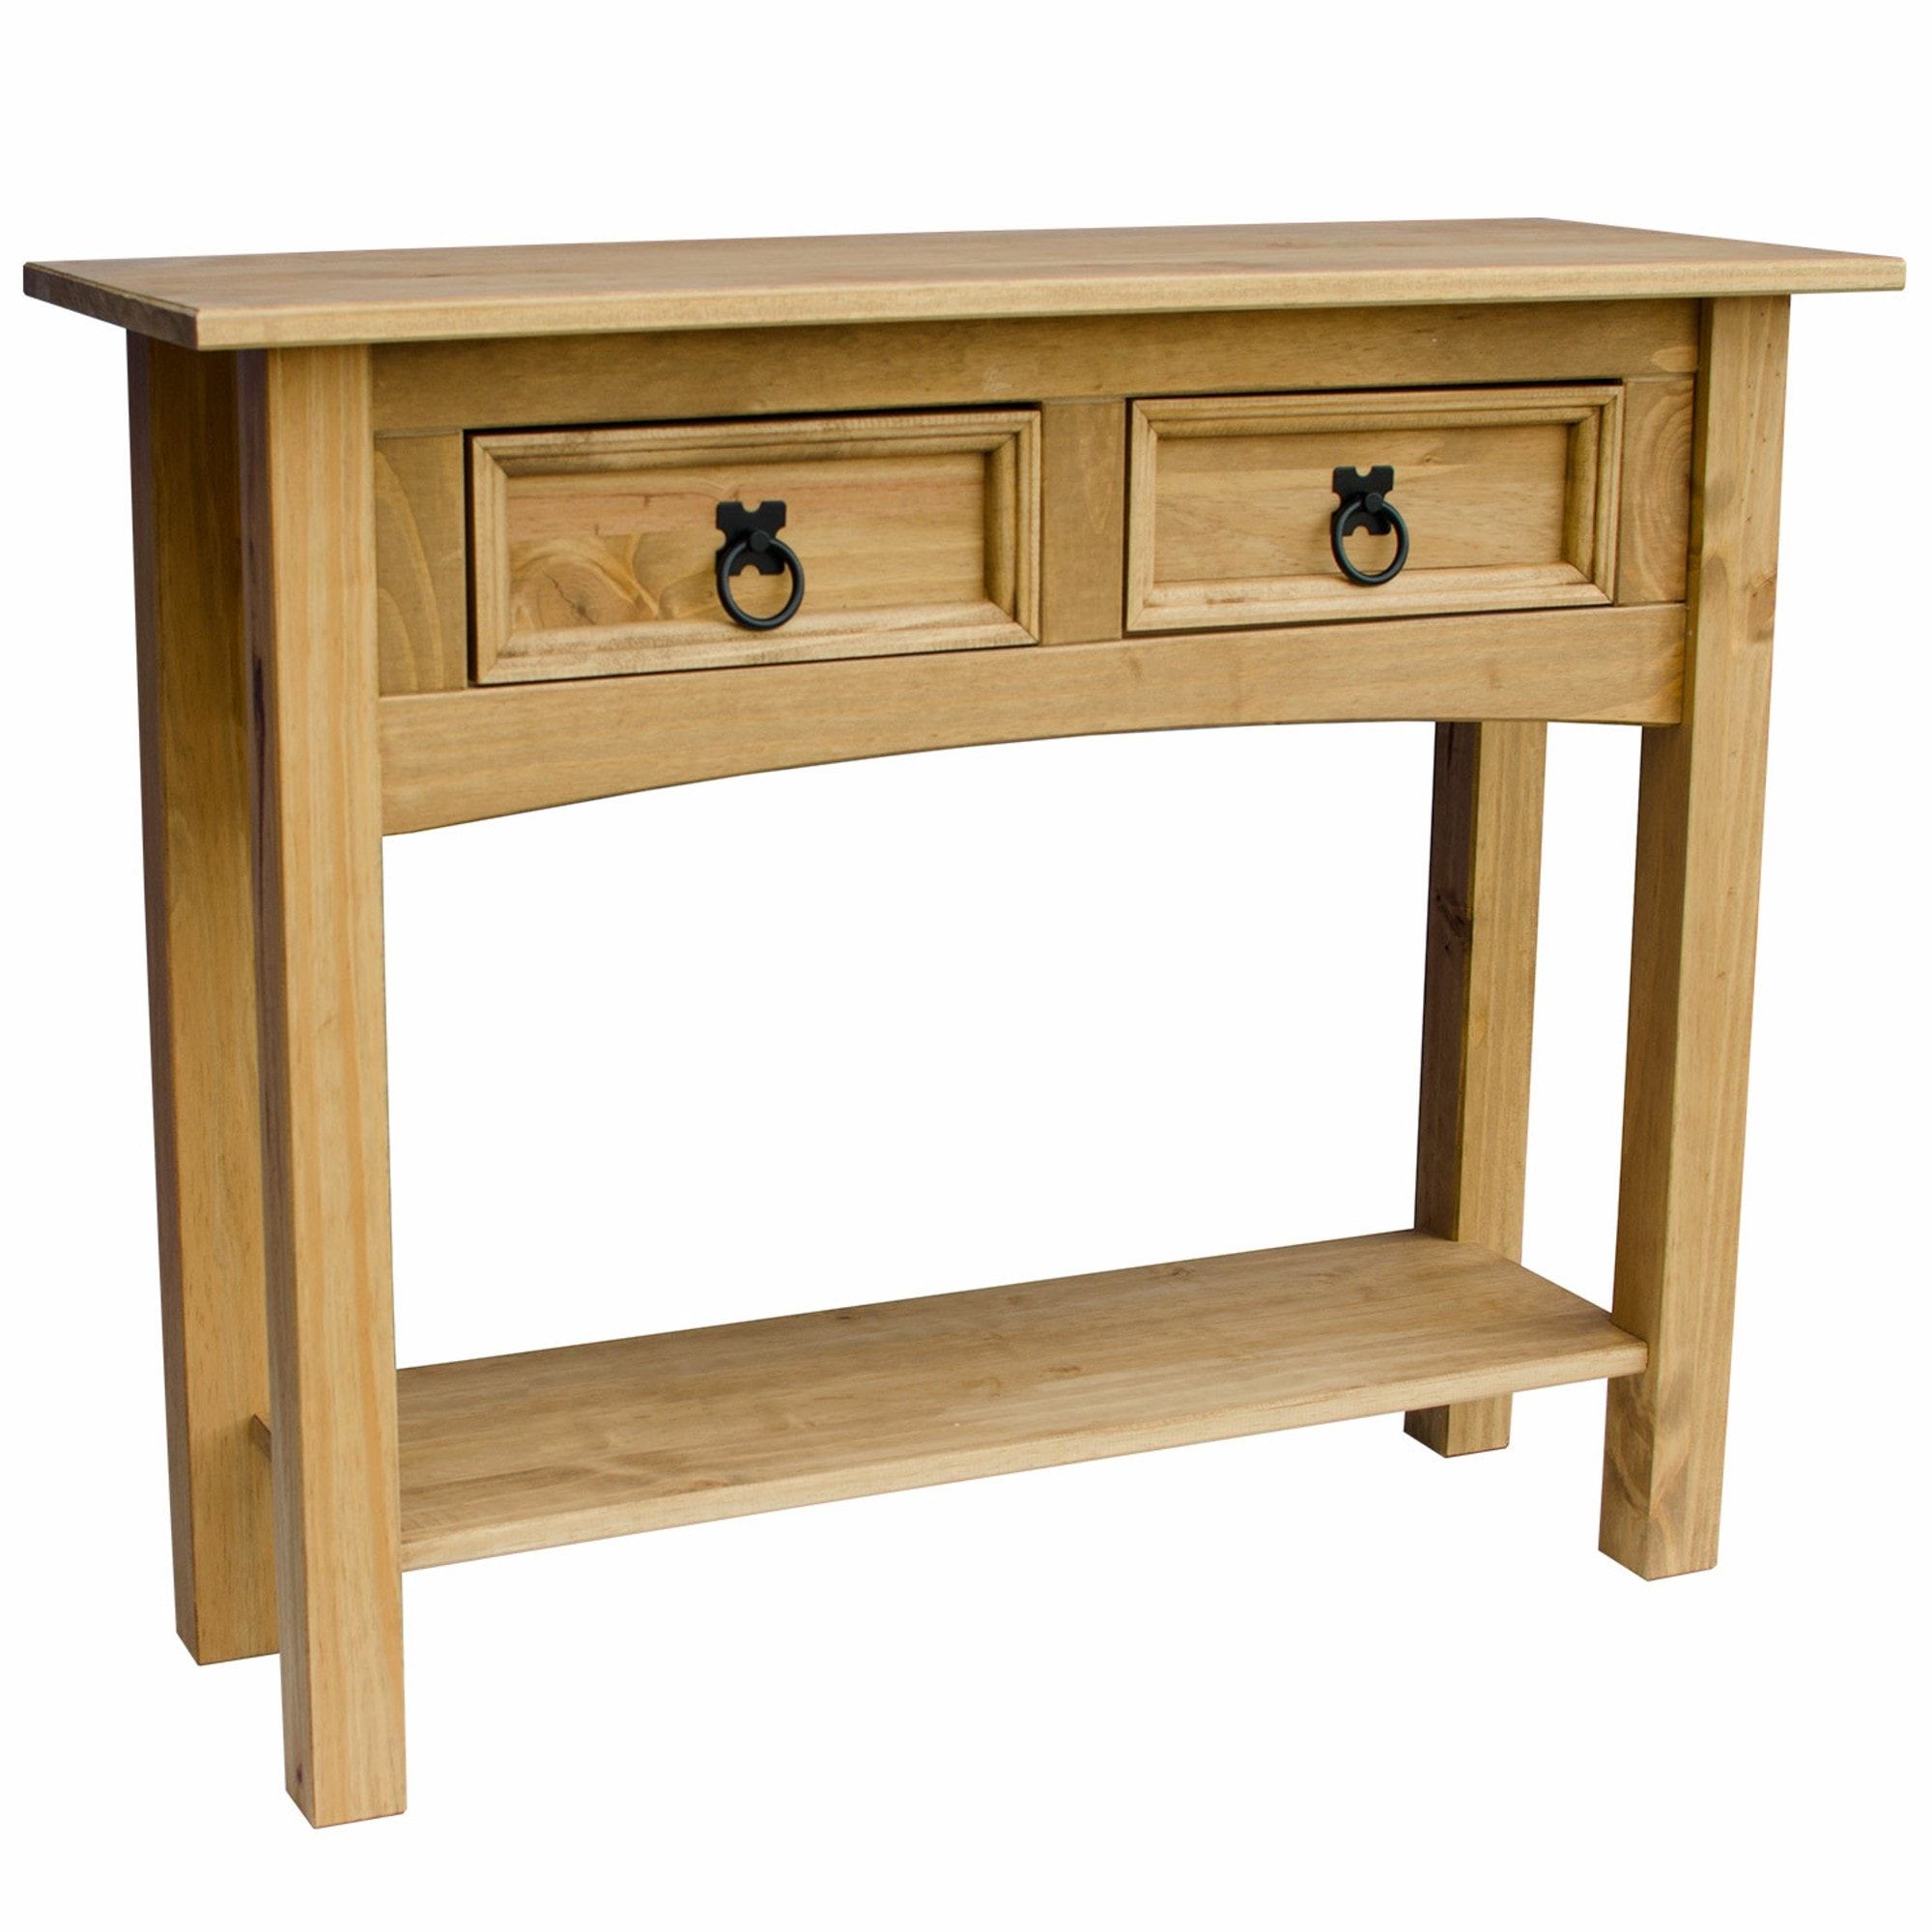 Corona 2 Drawer Console Table | Wood Furniture Inside 2 Drawer Oval Console Tables (Photo 7 of 20)